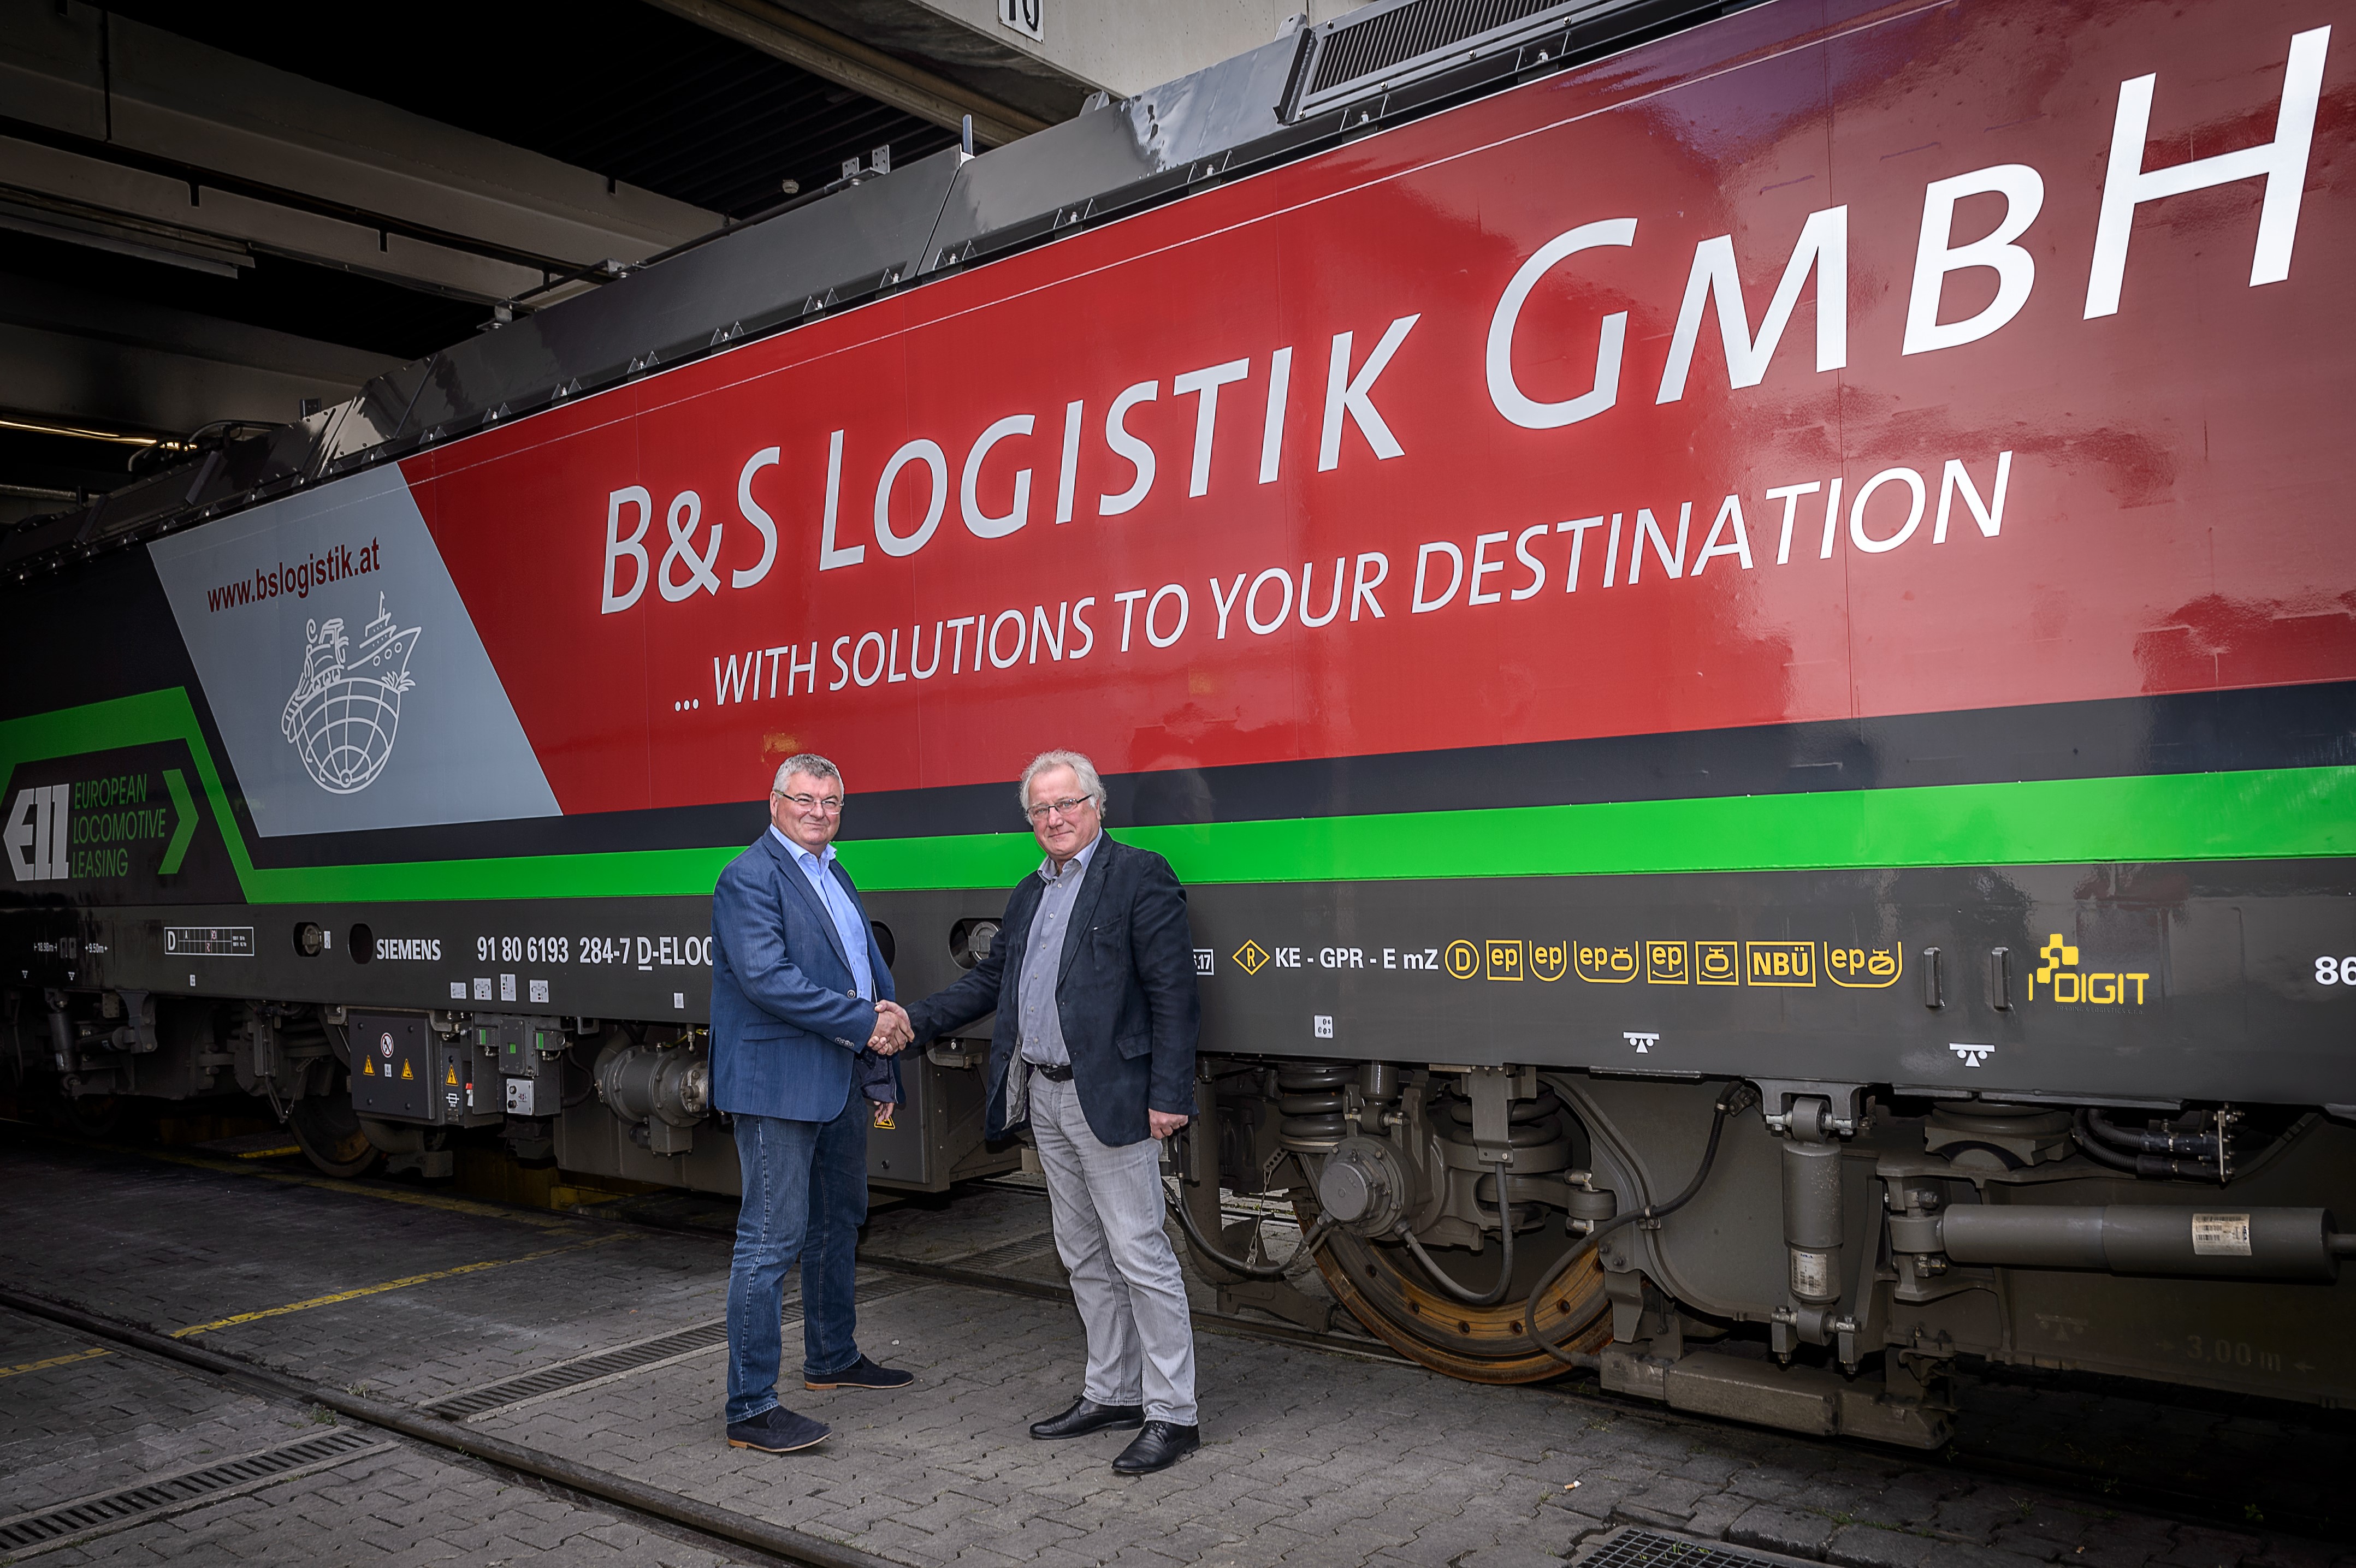 First Vectron in the design of B & S Logistik GmbH